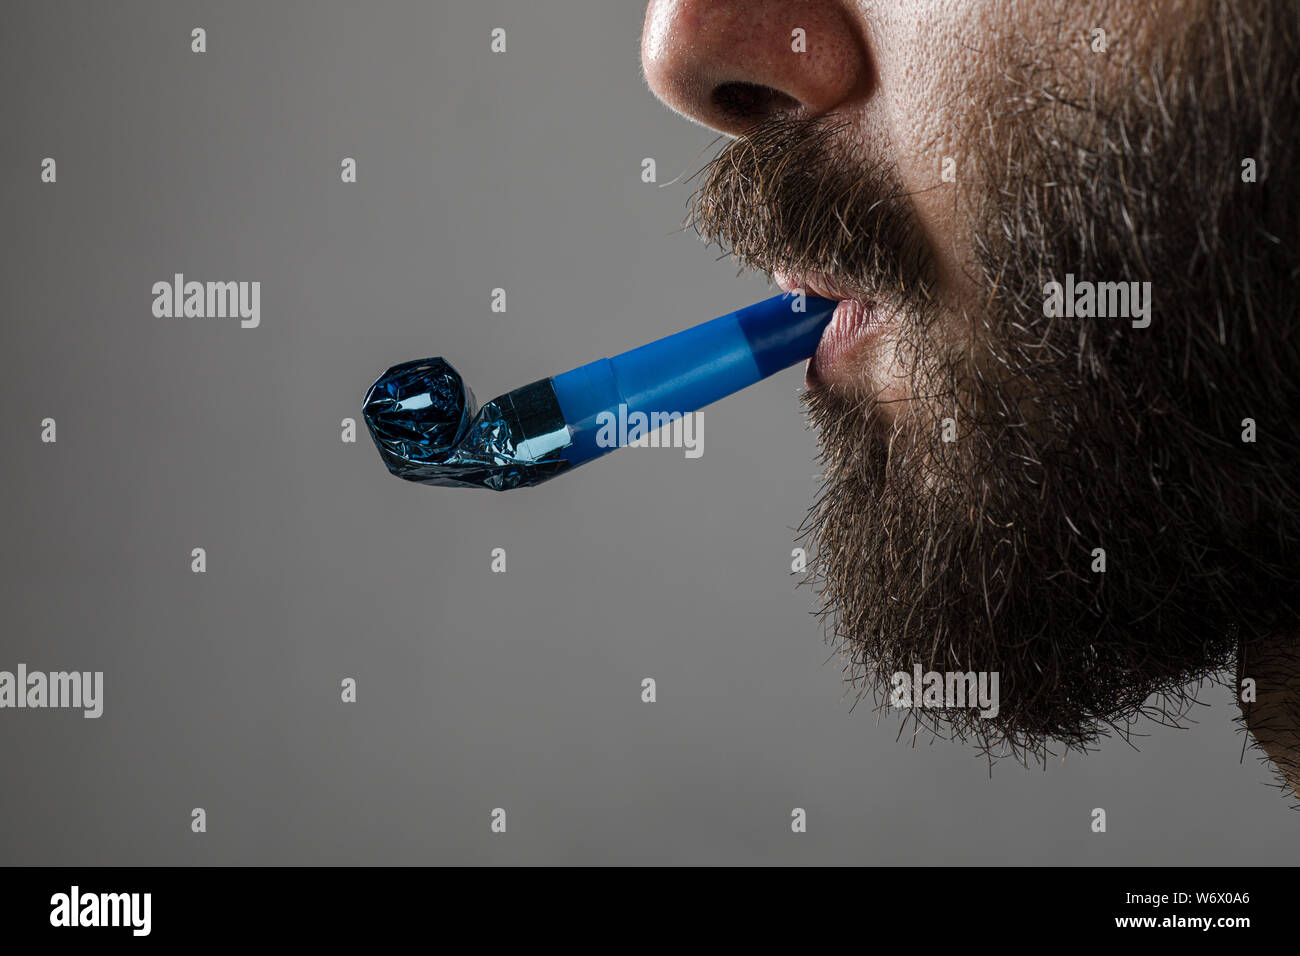 Man with Beard with a Party Horn Blower on Gray Background Stock Photo